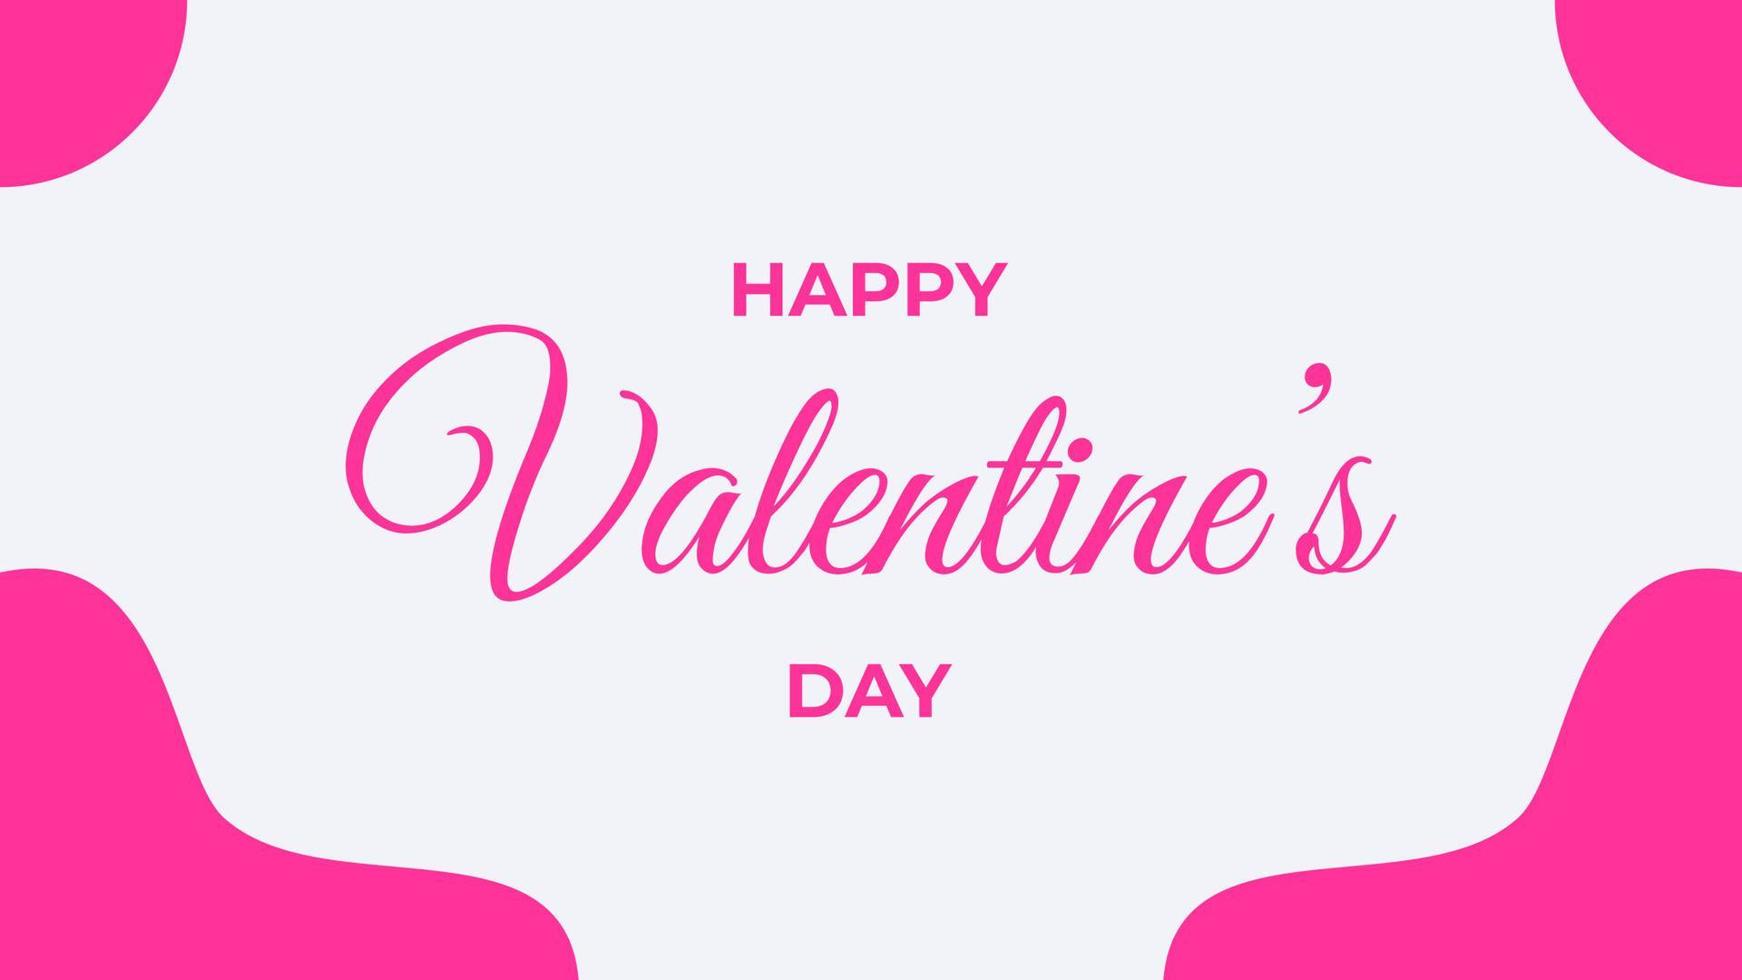 HAPPY VALENTINE'S DAY BANNER DESIGN. SUITABLE TO USE ON VALENTINE'S DAY EVENT vector